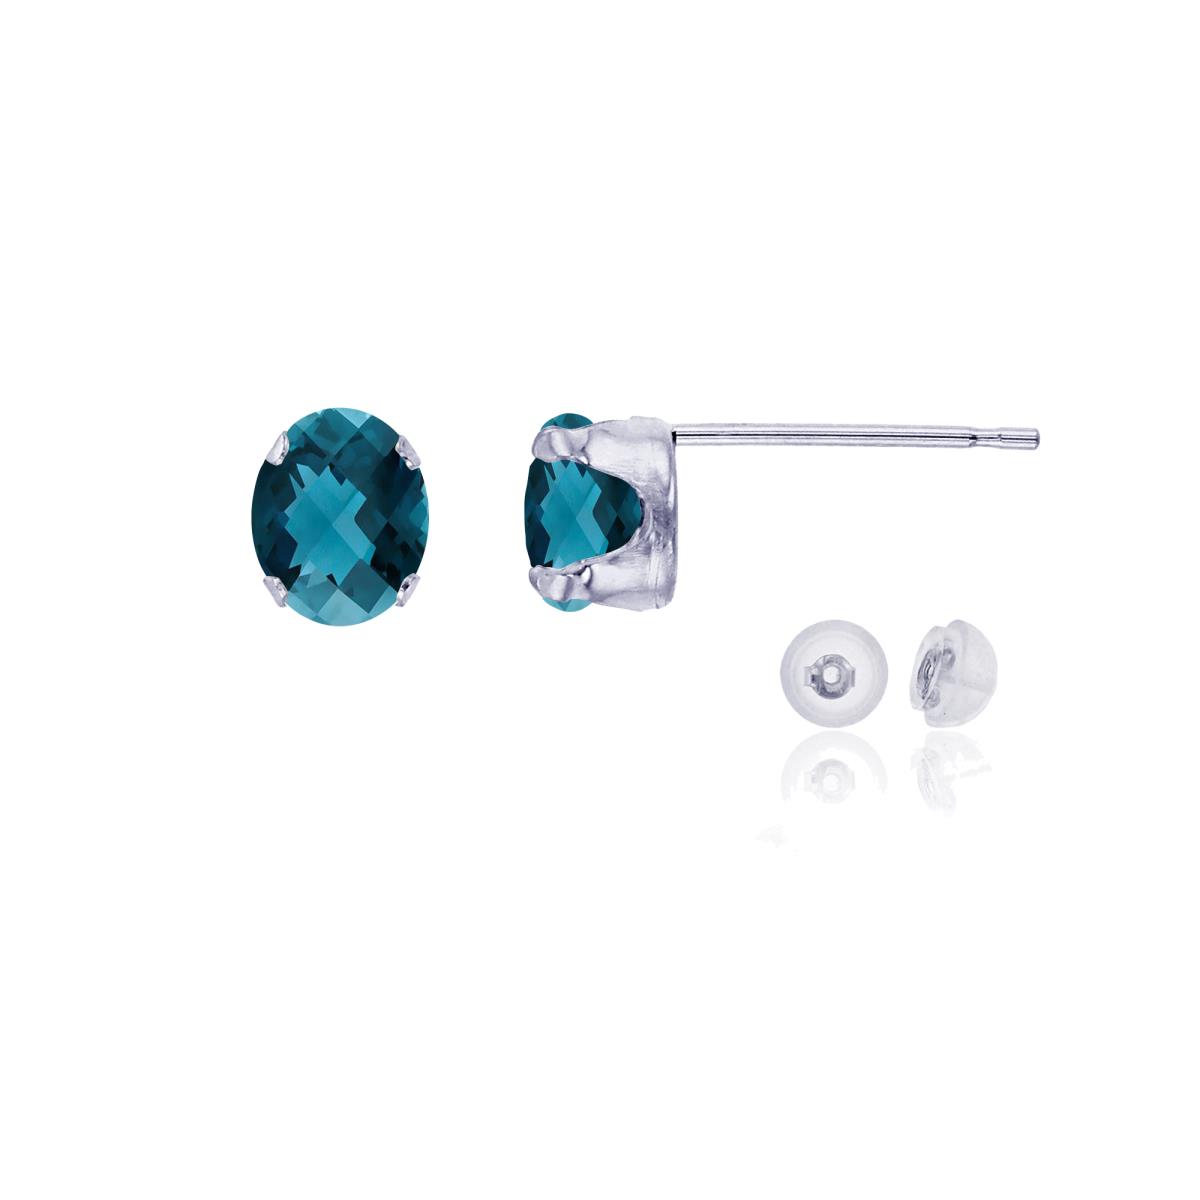 14K White Gold 6x4mm Oval London Blue Topaz Stud Earring with Silicone Back